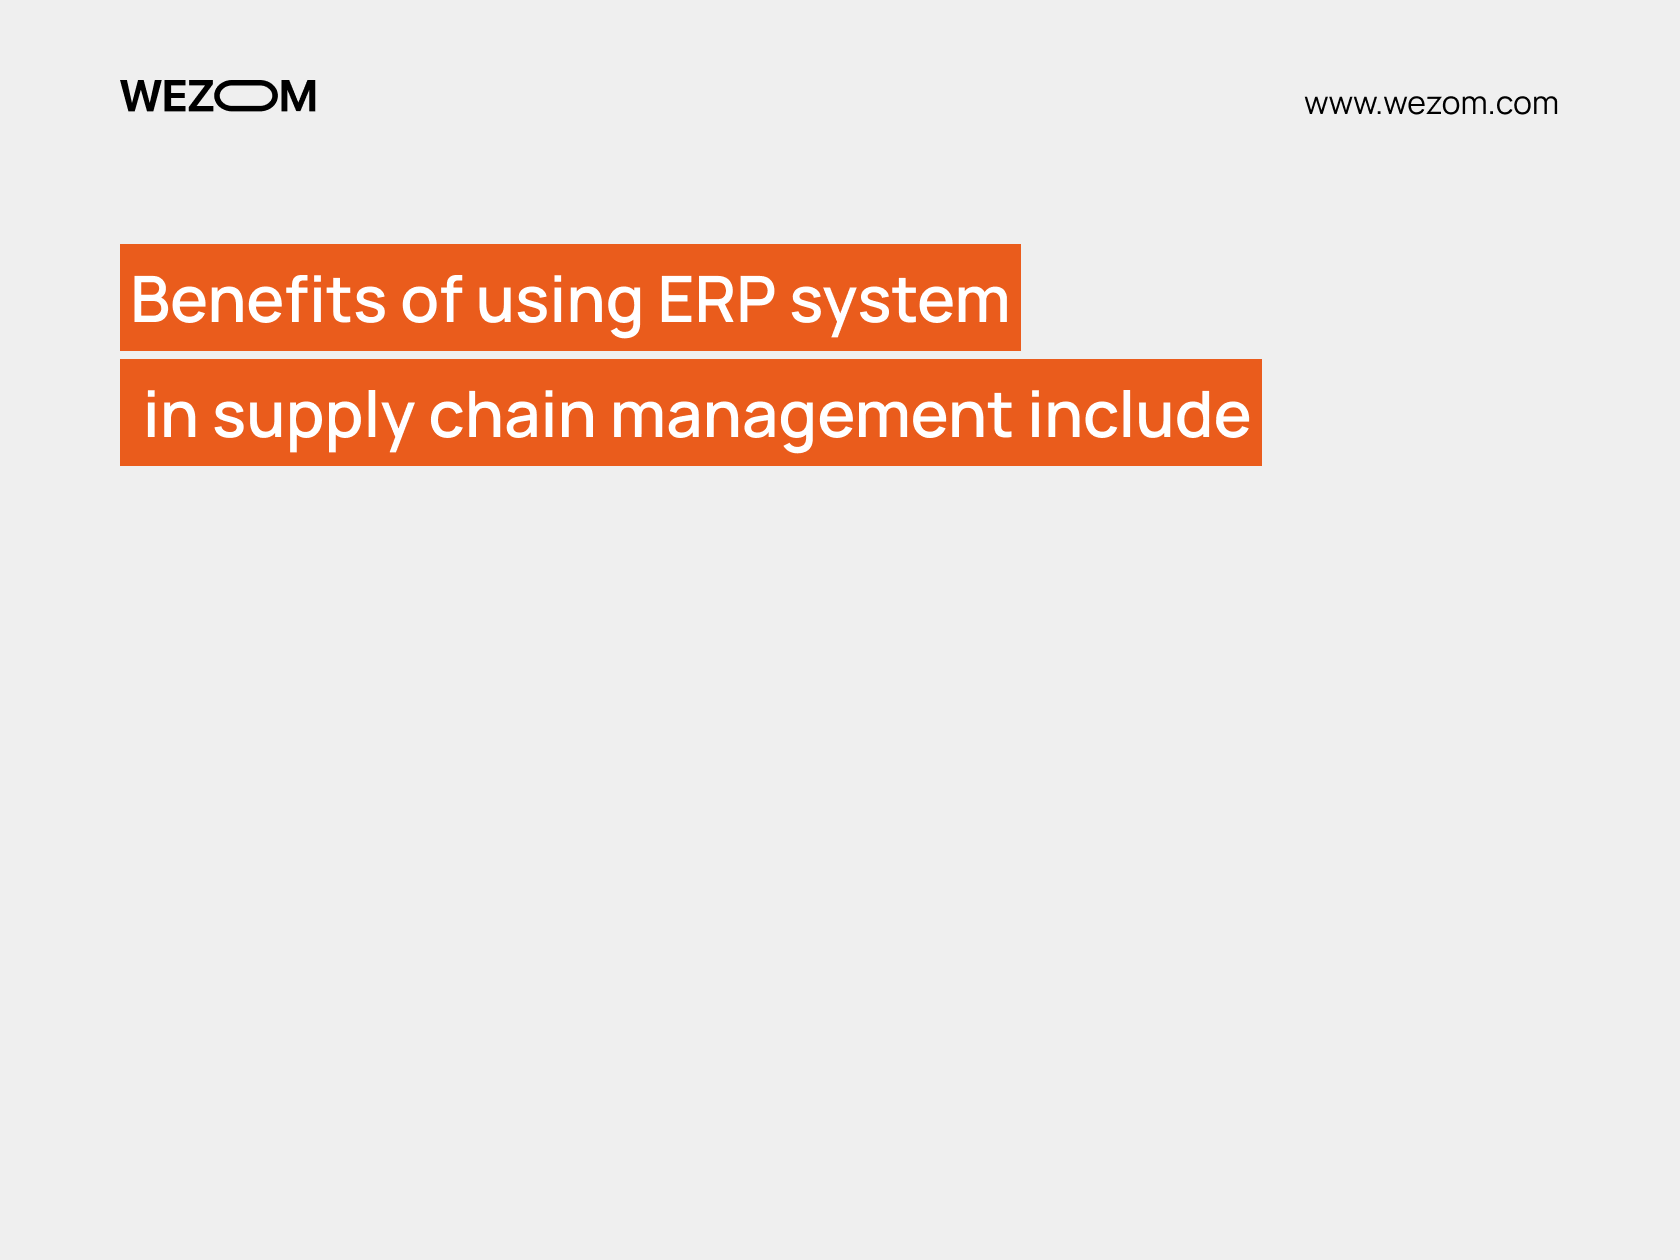 Key benefits of ERP in supply chain management